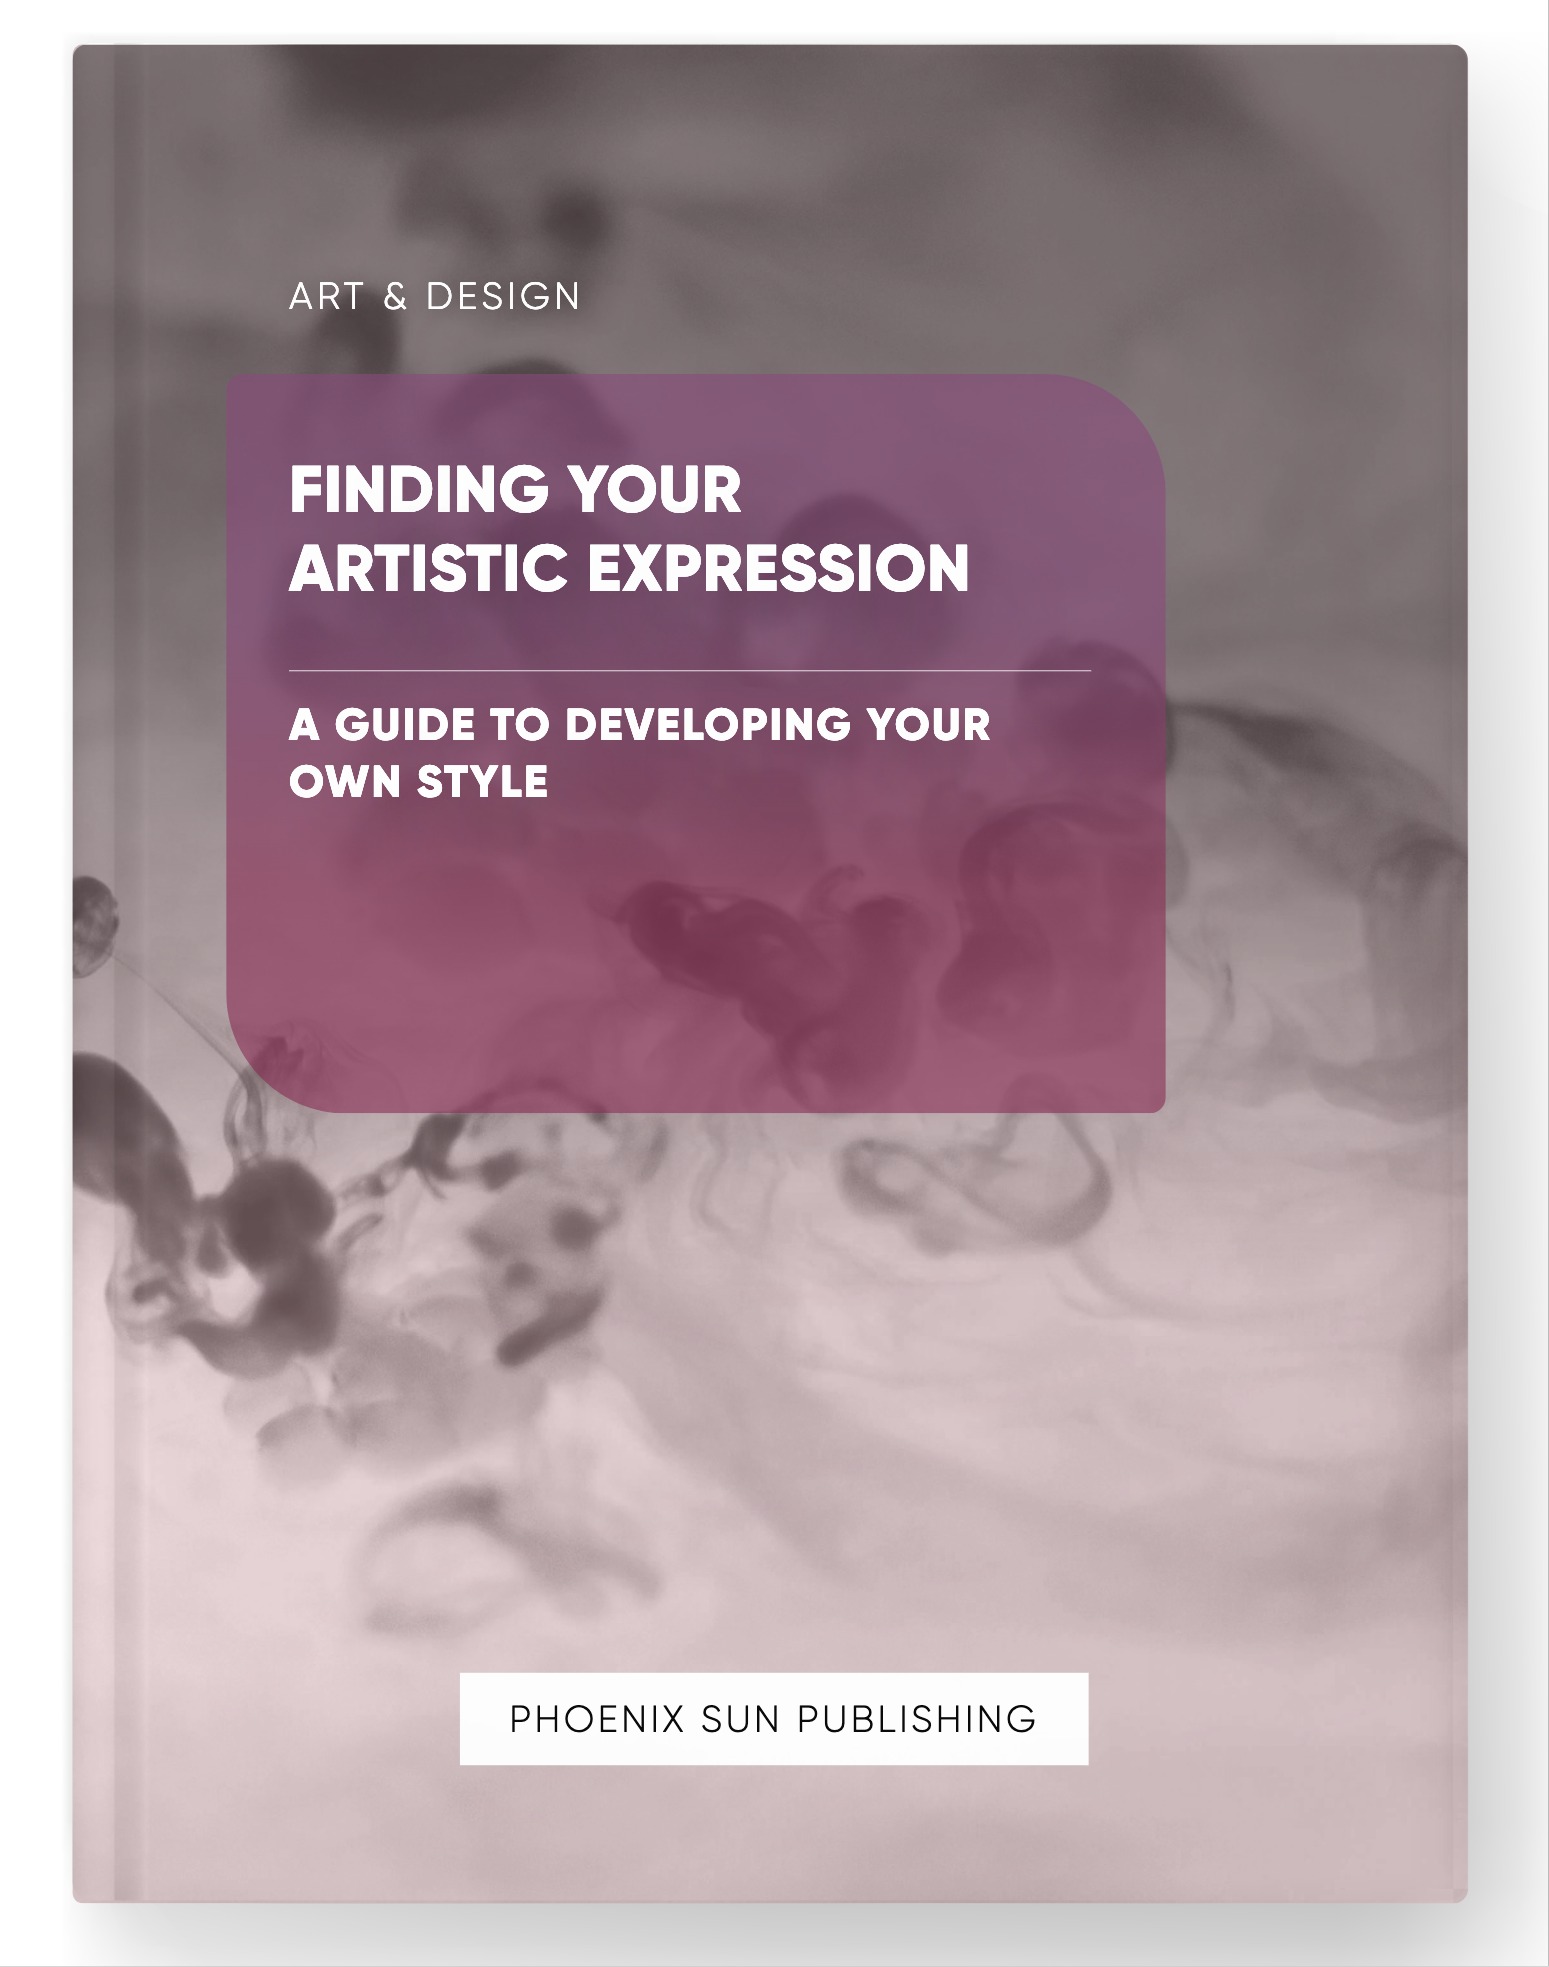 Finding Your Artistic Expression – A Guide to Developing Your Own Style